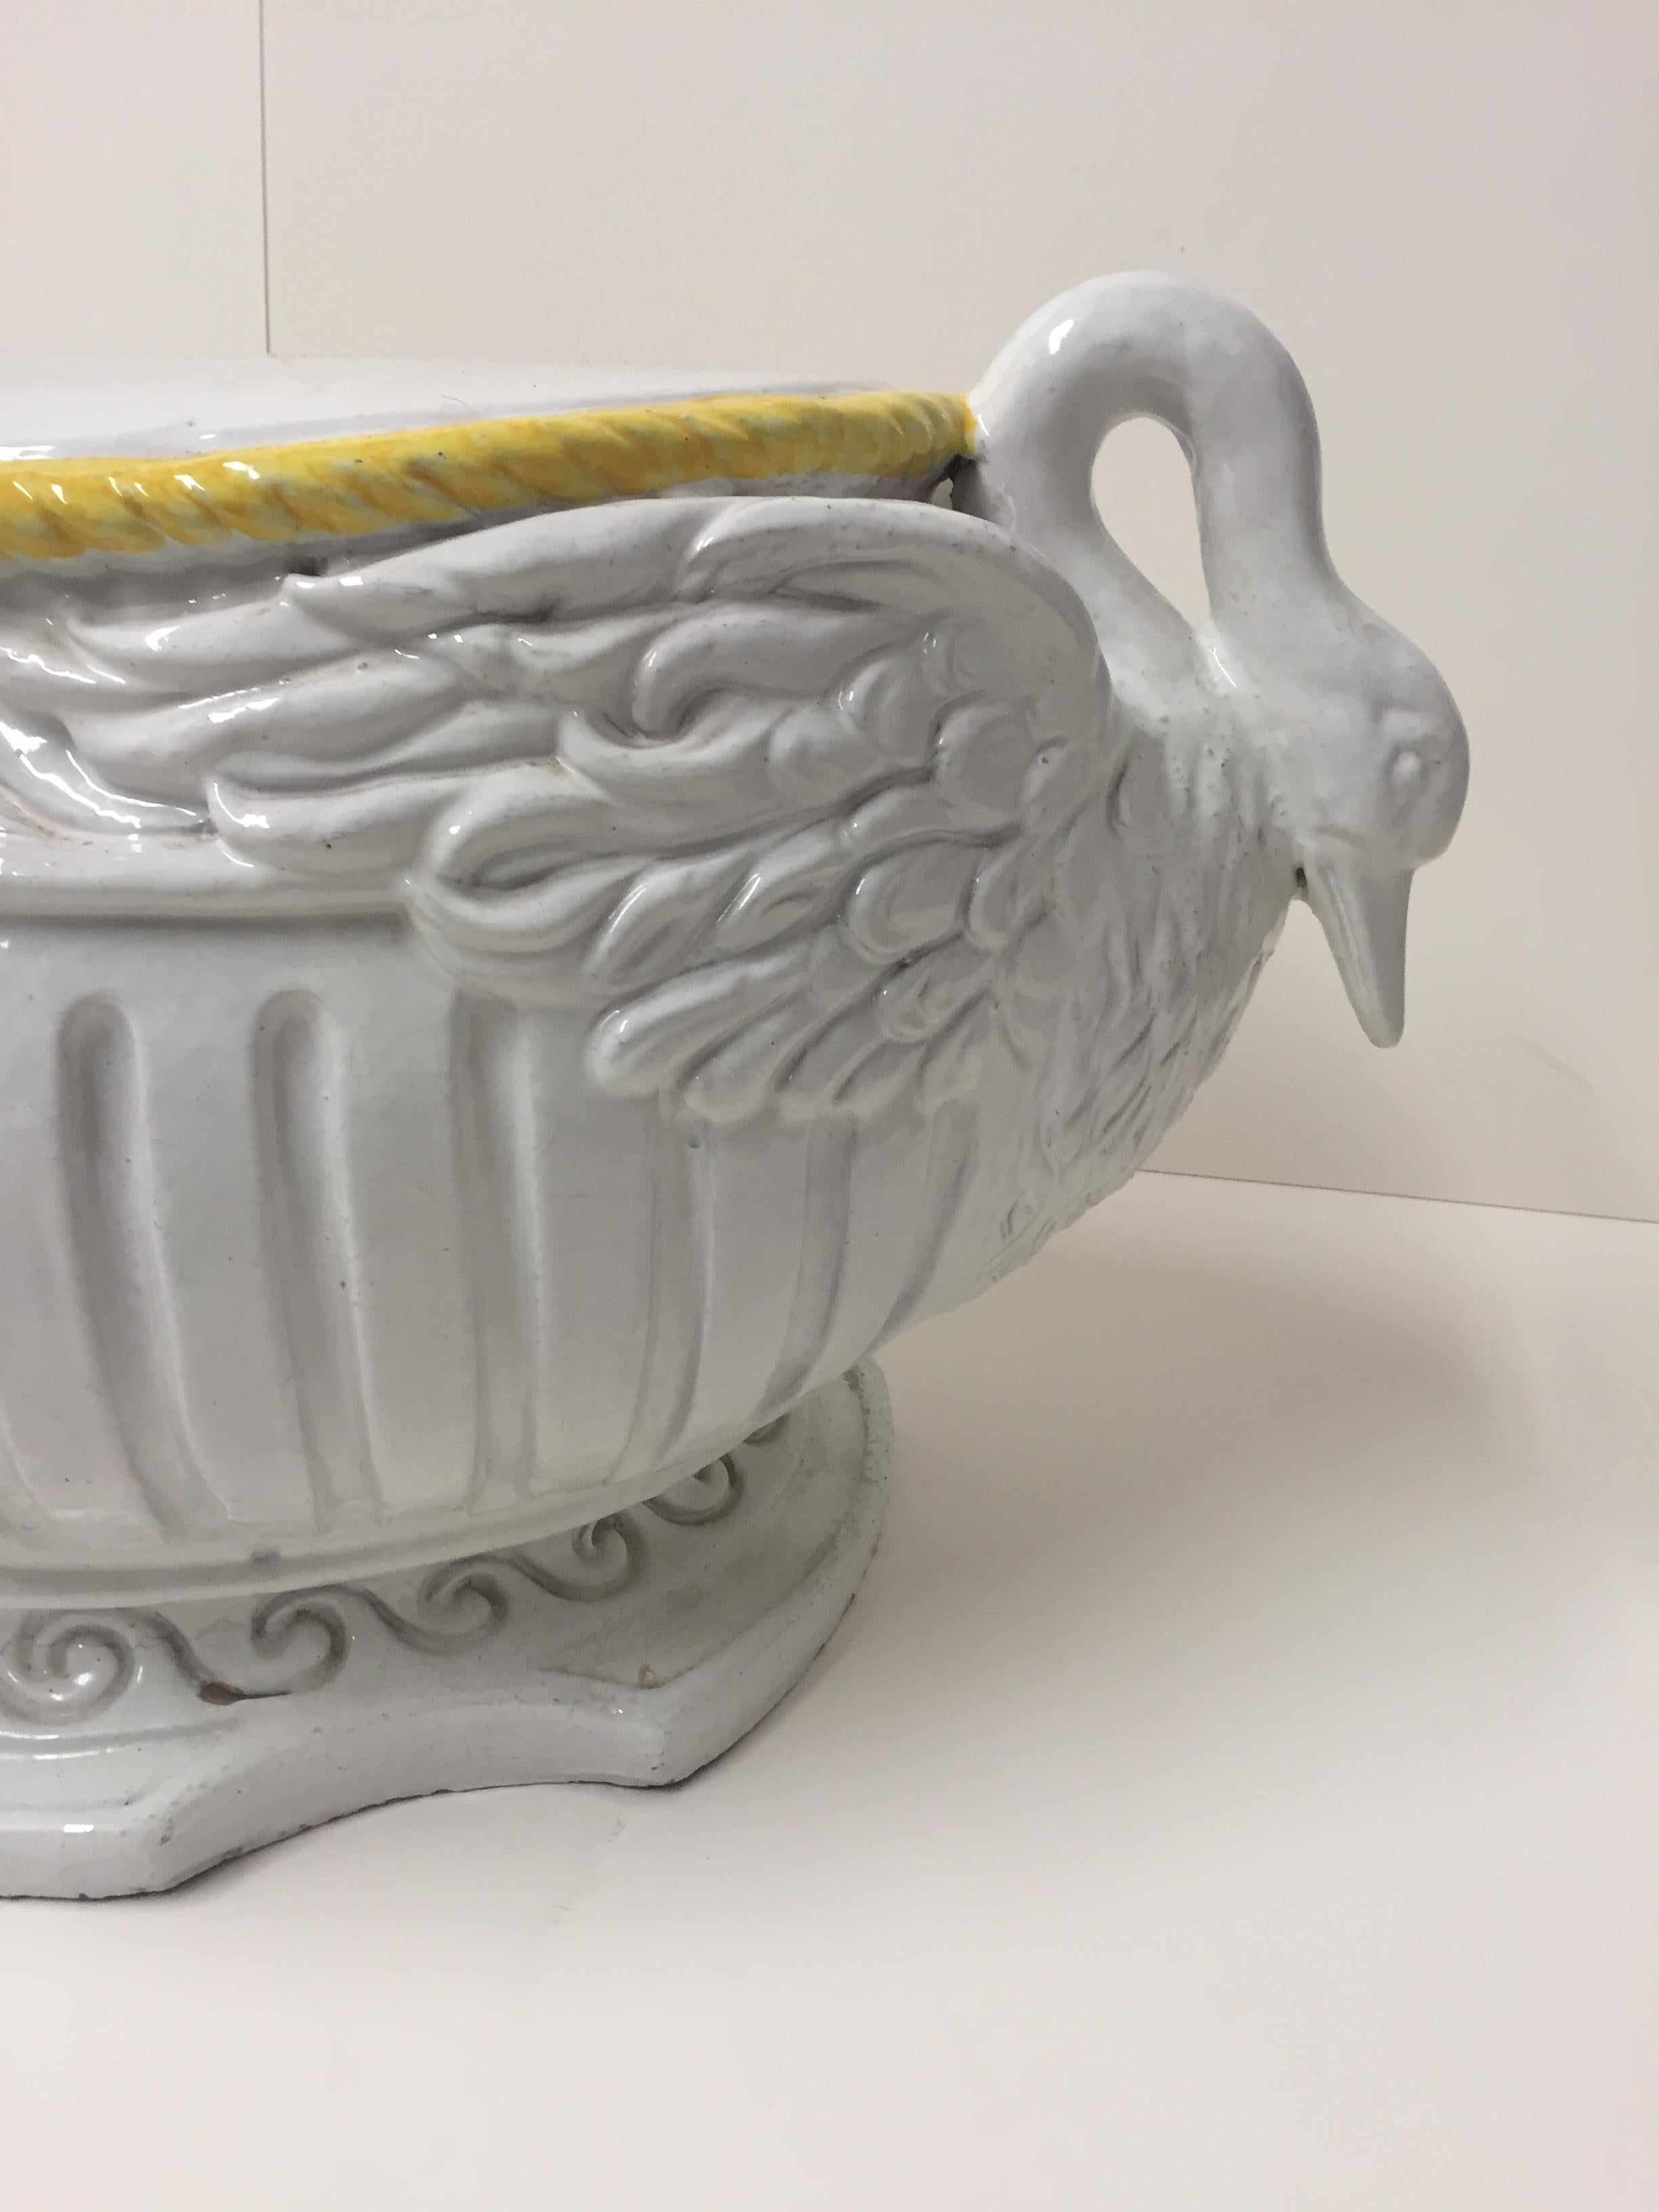 A rare form ceramic garden seat in white and yellow having a flat oval top and romantic decorative base with two swan heads adorning each side.